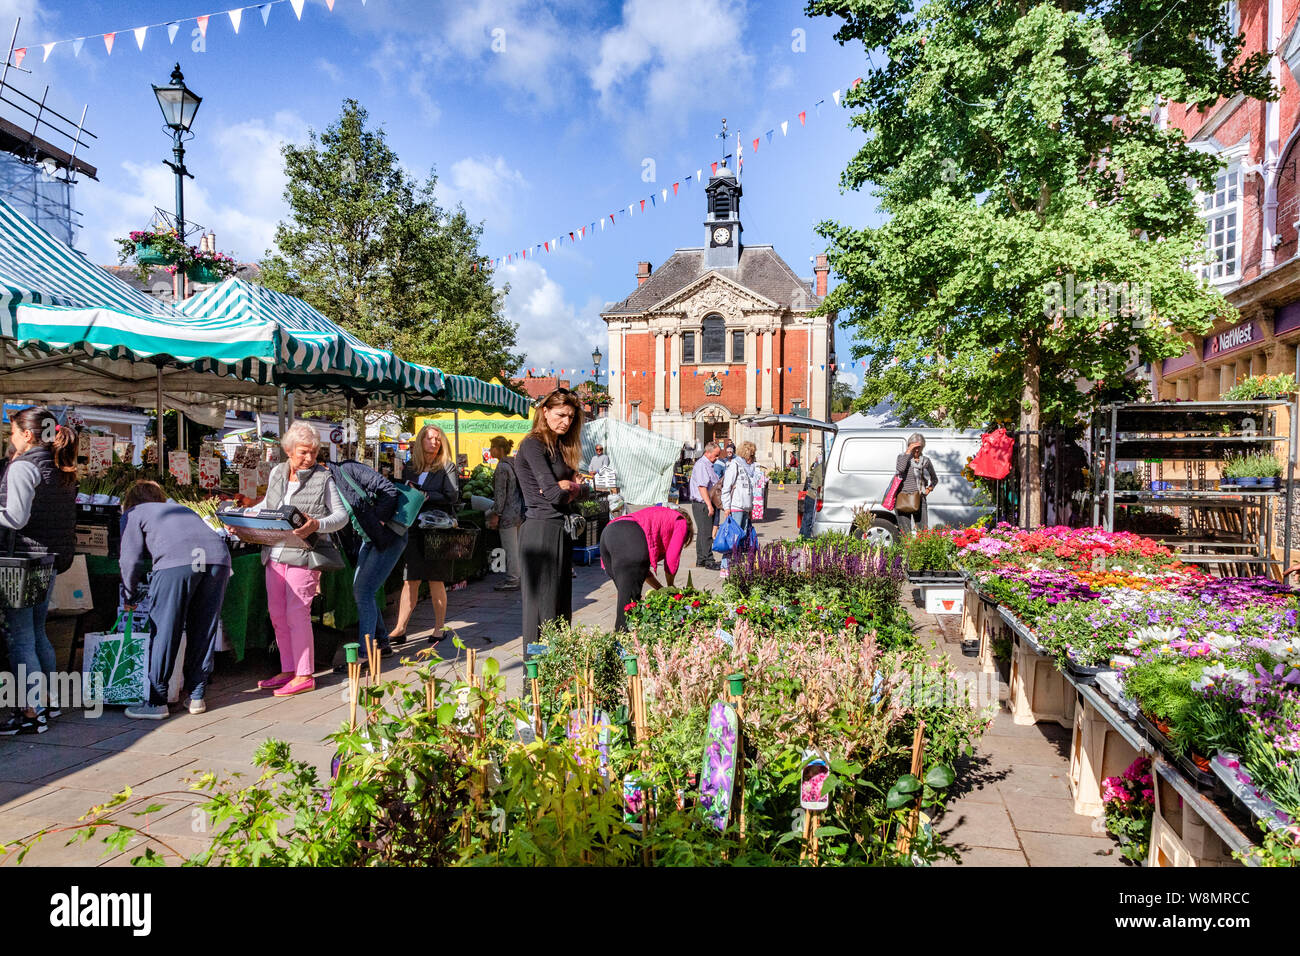 6 June 2019: Henley on Thames, UK - Plant stall at historic market, with the Town Hall behind, on a beautiful summer morning. Stock Photo